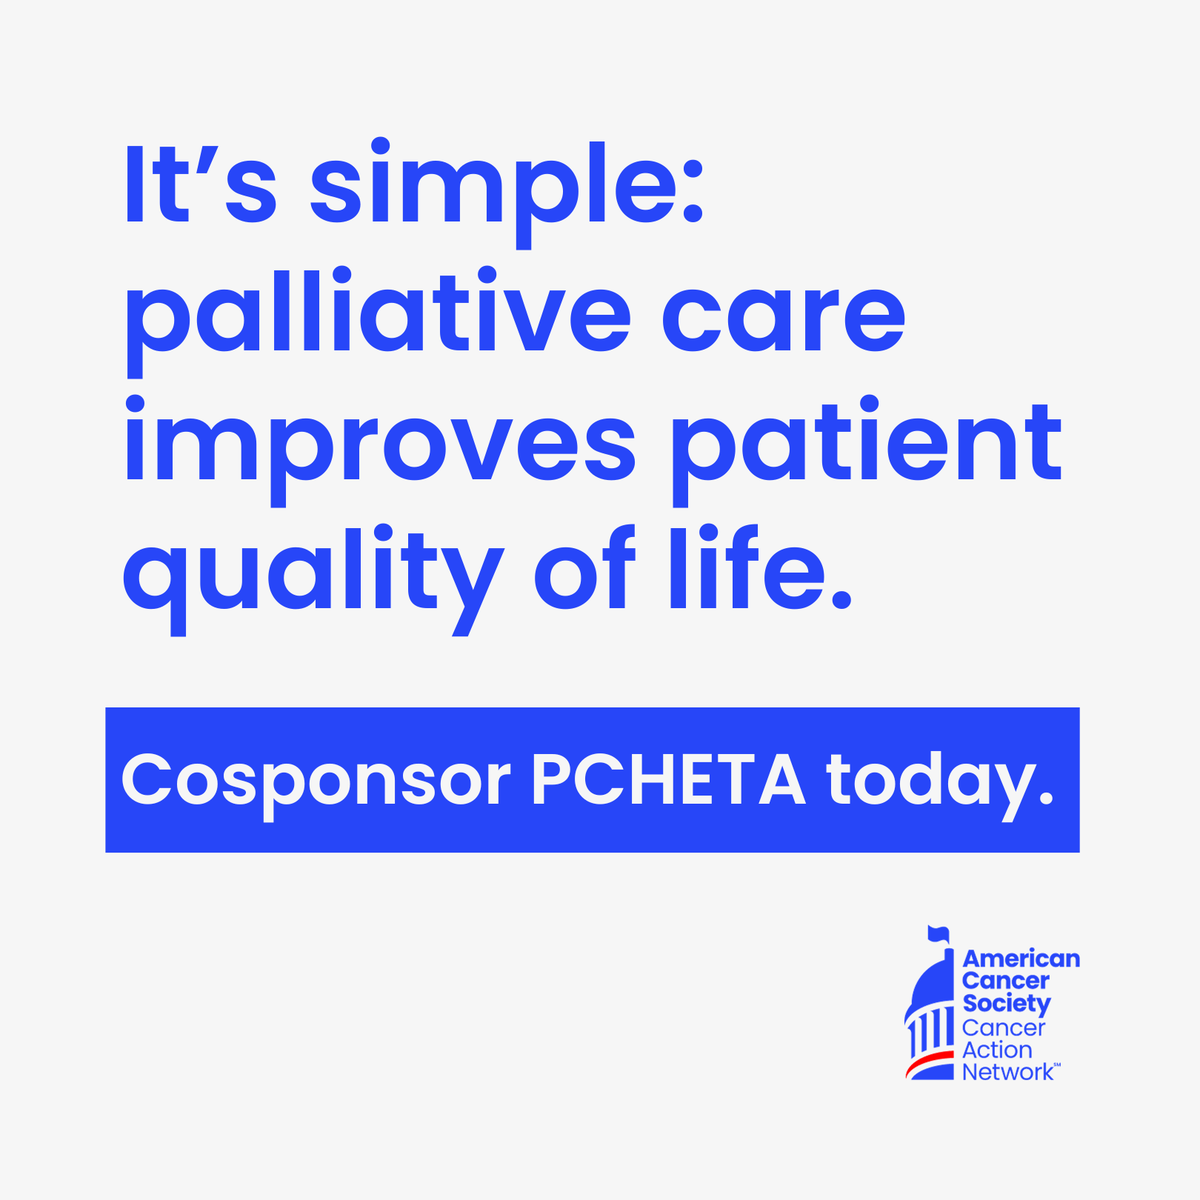 It's the #PCHETA Online Day of Action! As part of @PatientQoL, we're urging Congress to improve the quality of life for millions of patients and families with serious illnesses like cancer. #NationalHospiceAndPalliativeCareMonth